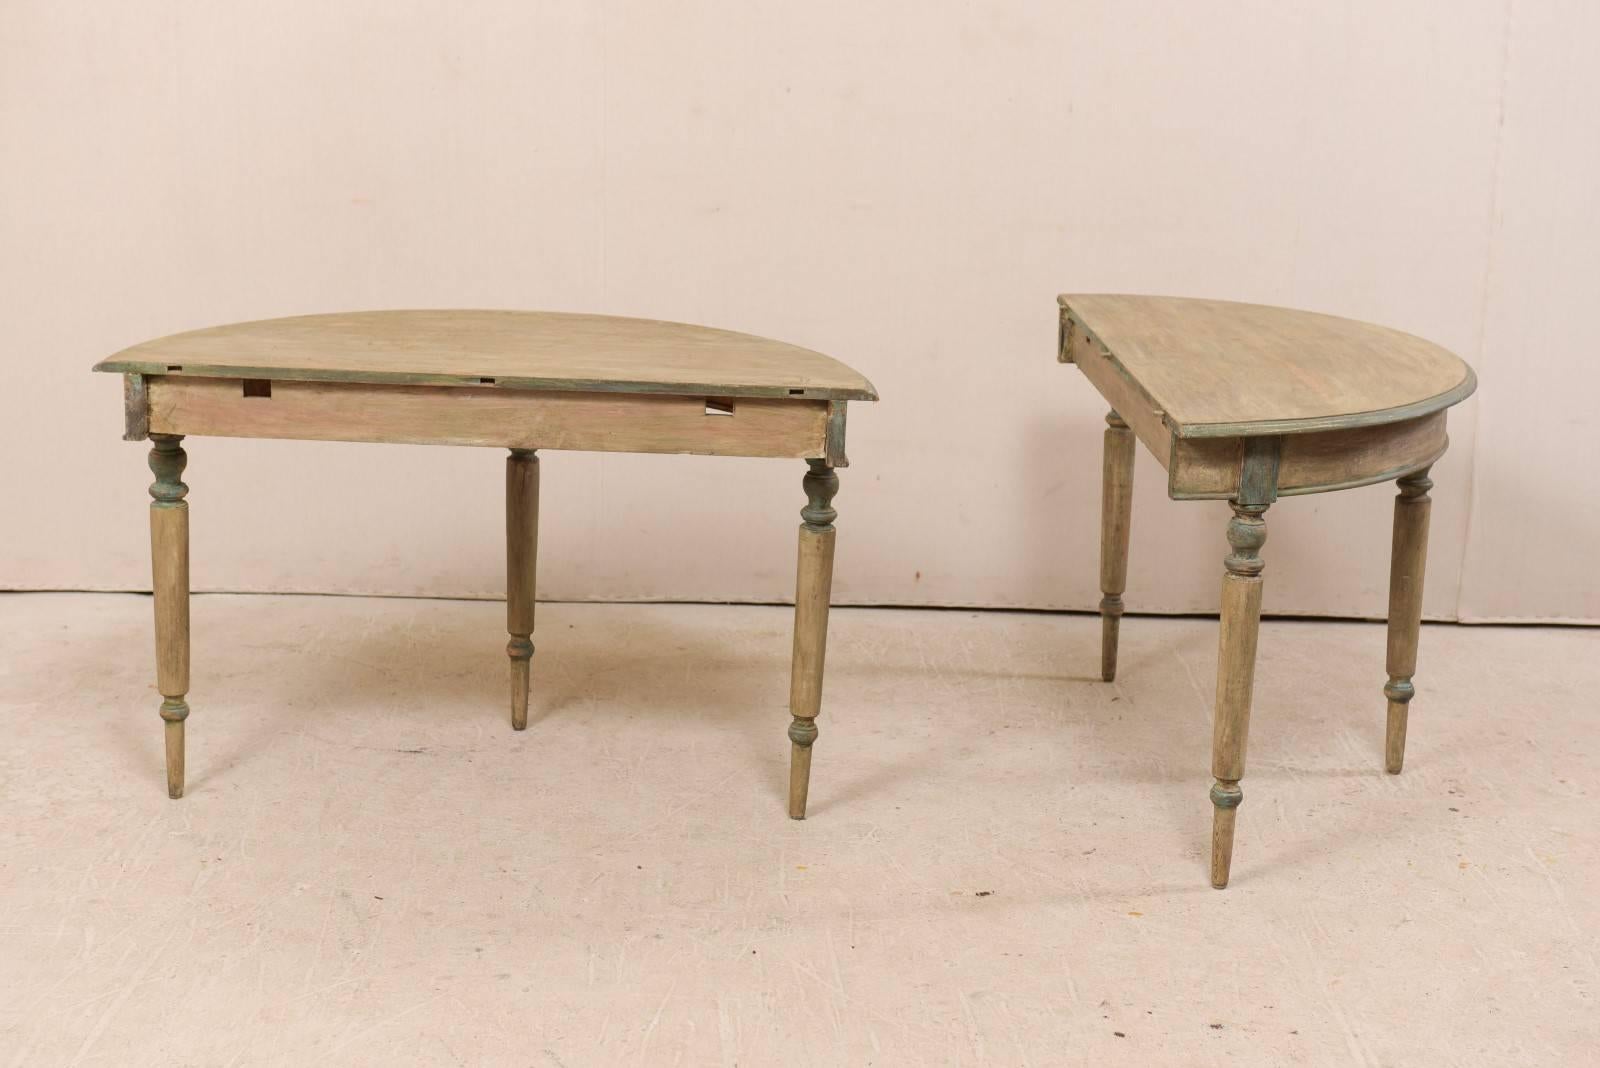 Pair of 19th Century Swedish Painted Wood Demi-Lune Tables with Turned Legs 2